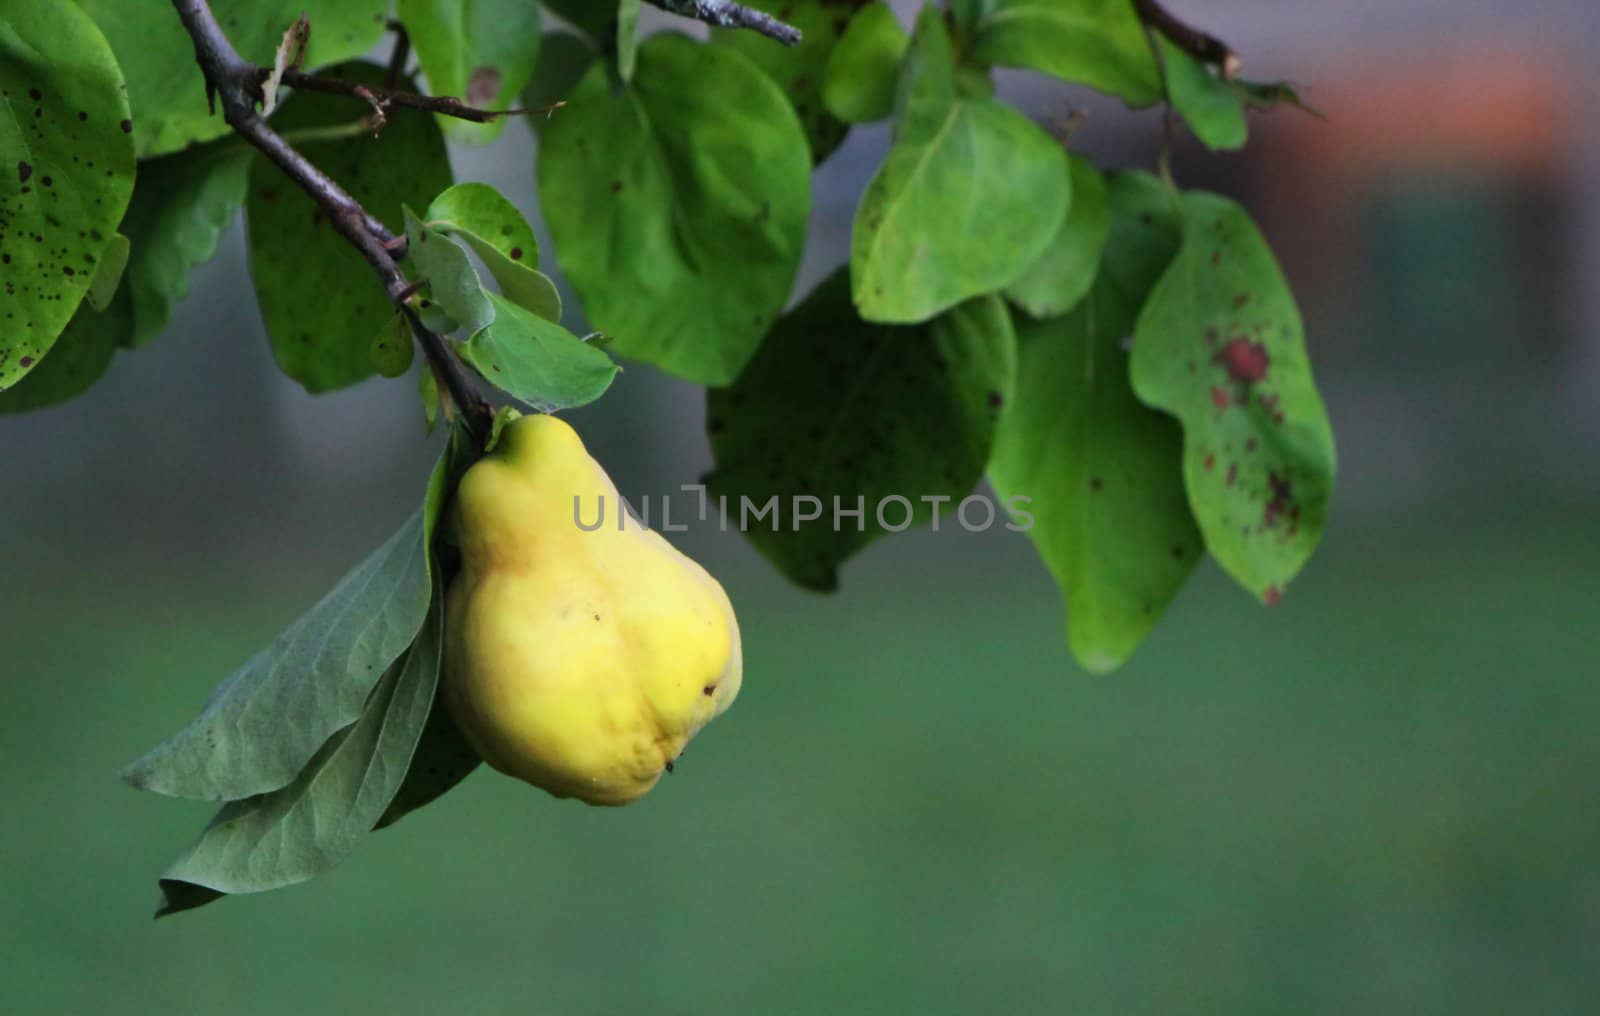 Yellow quince alone on tha branch of the tree